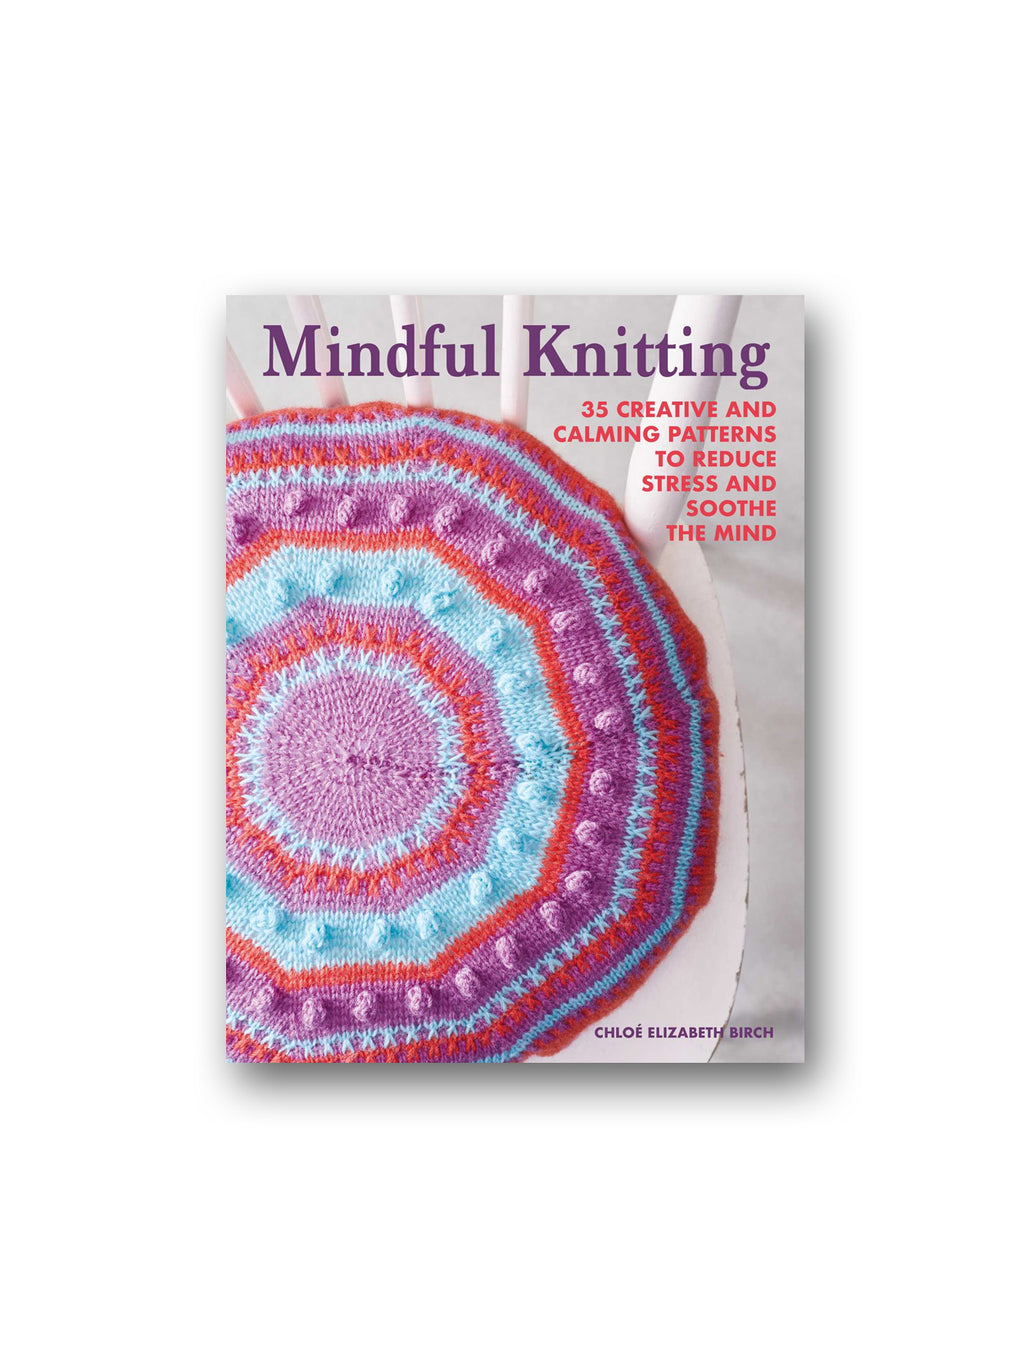 Mindful Knitting : 35 Creative and Calming Patterns to Reduce Stress and Soothe the Mind